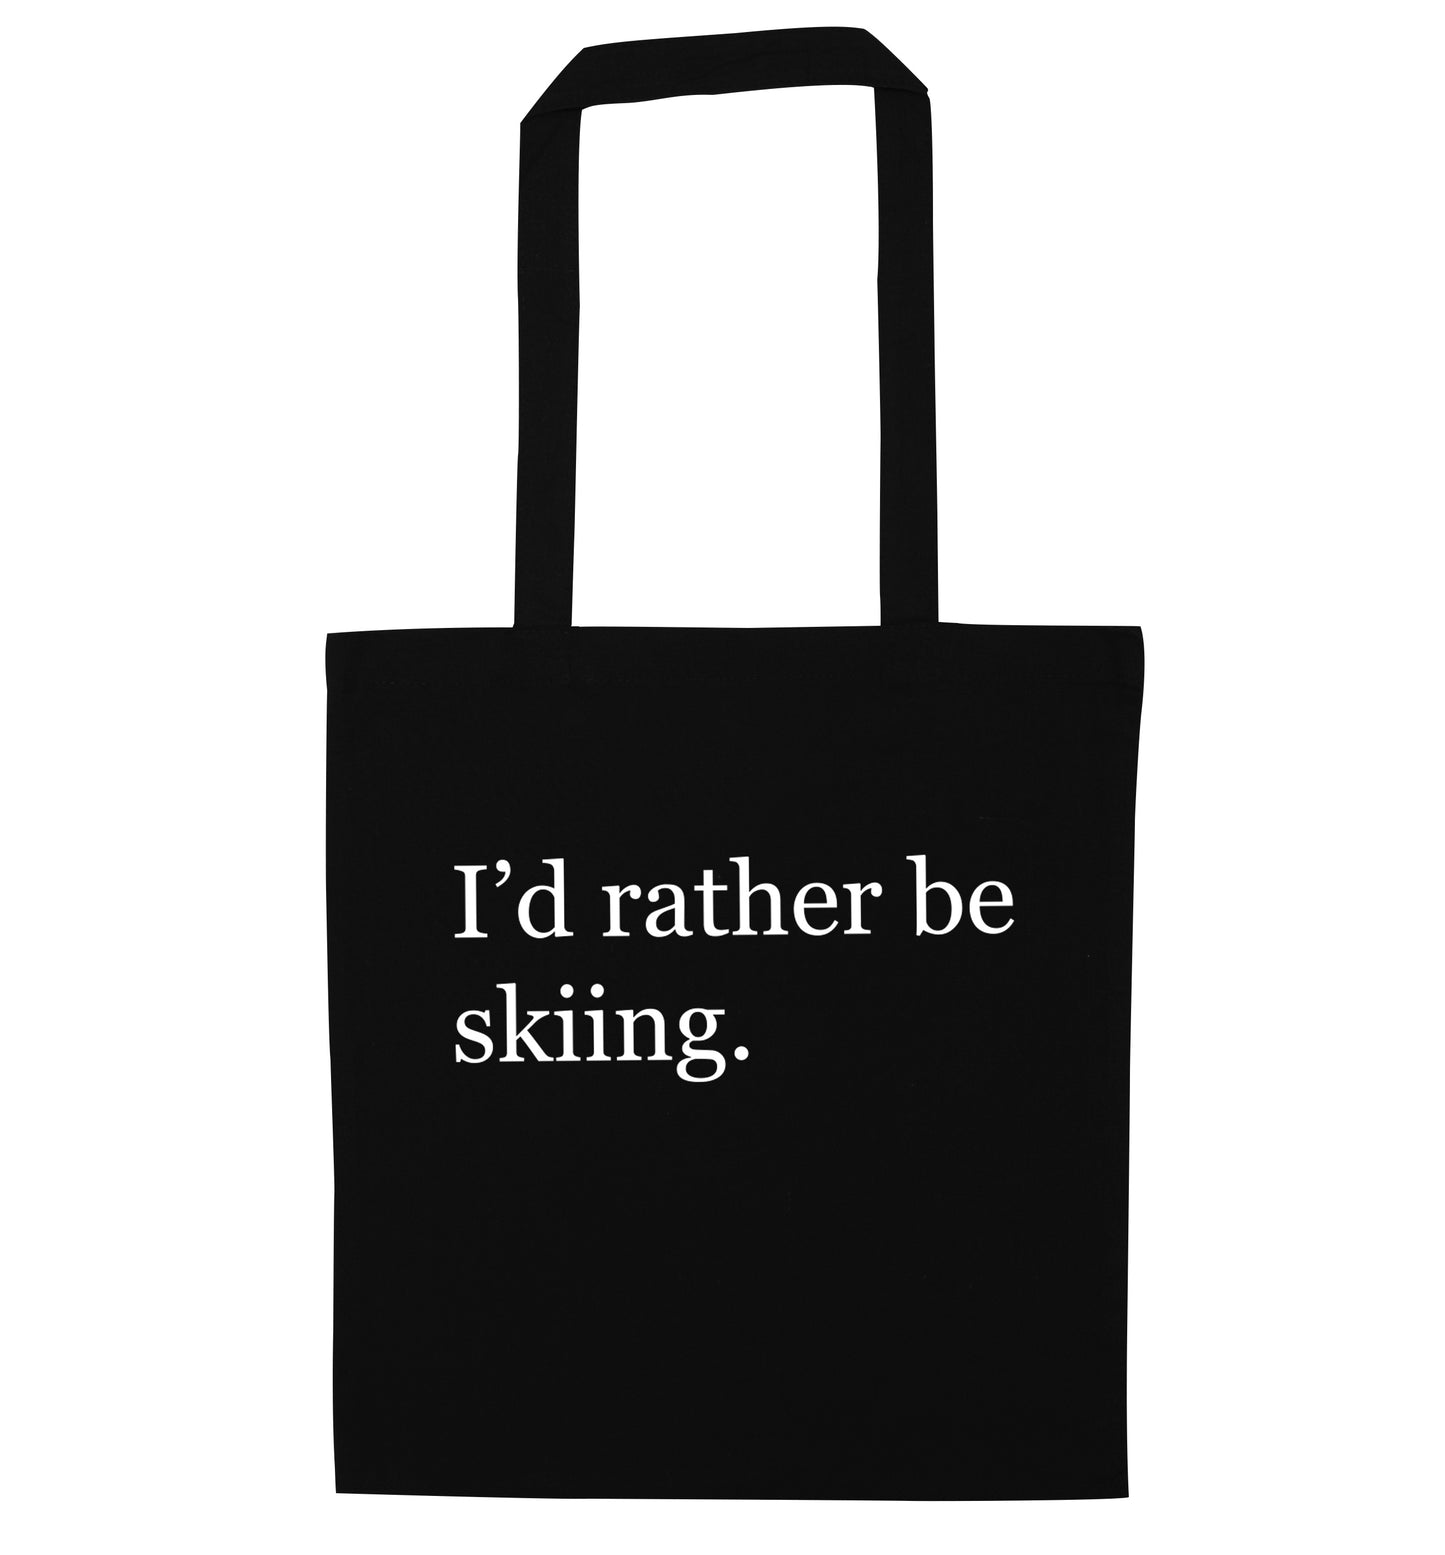 I'd rather be skiing black tote bag